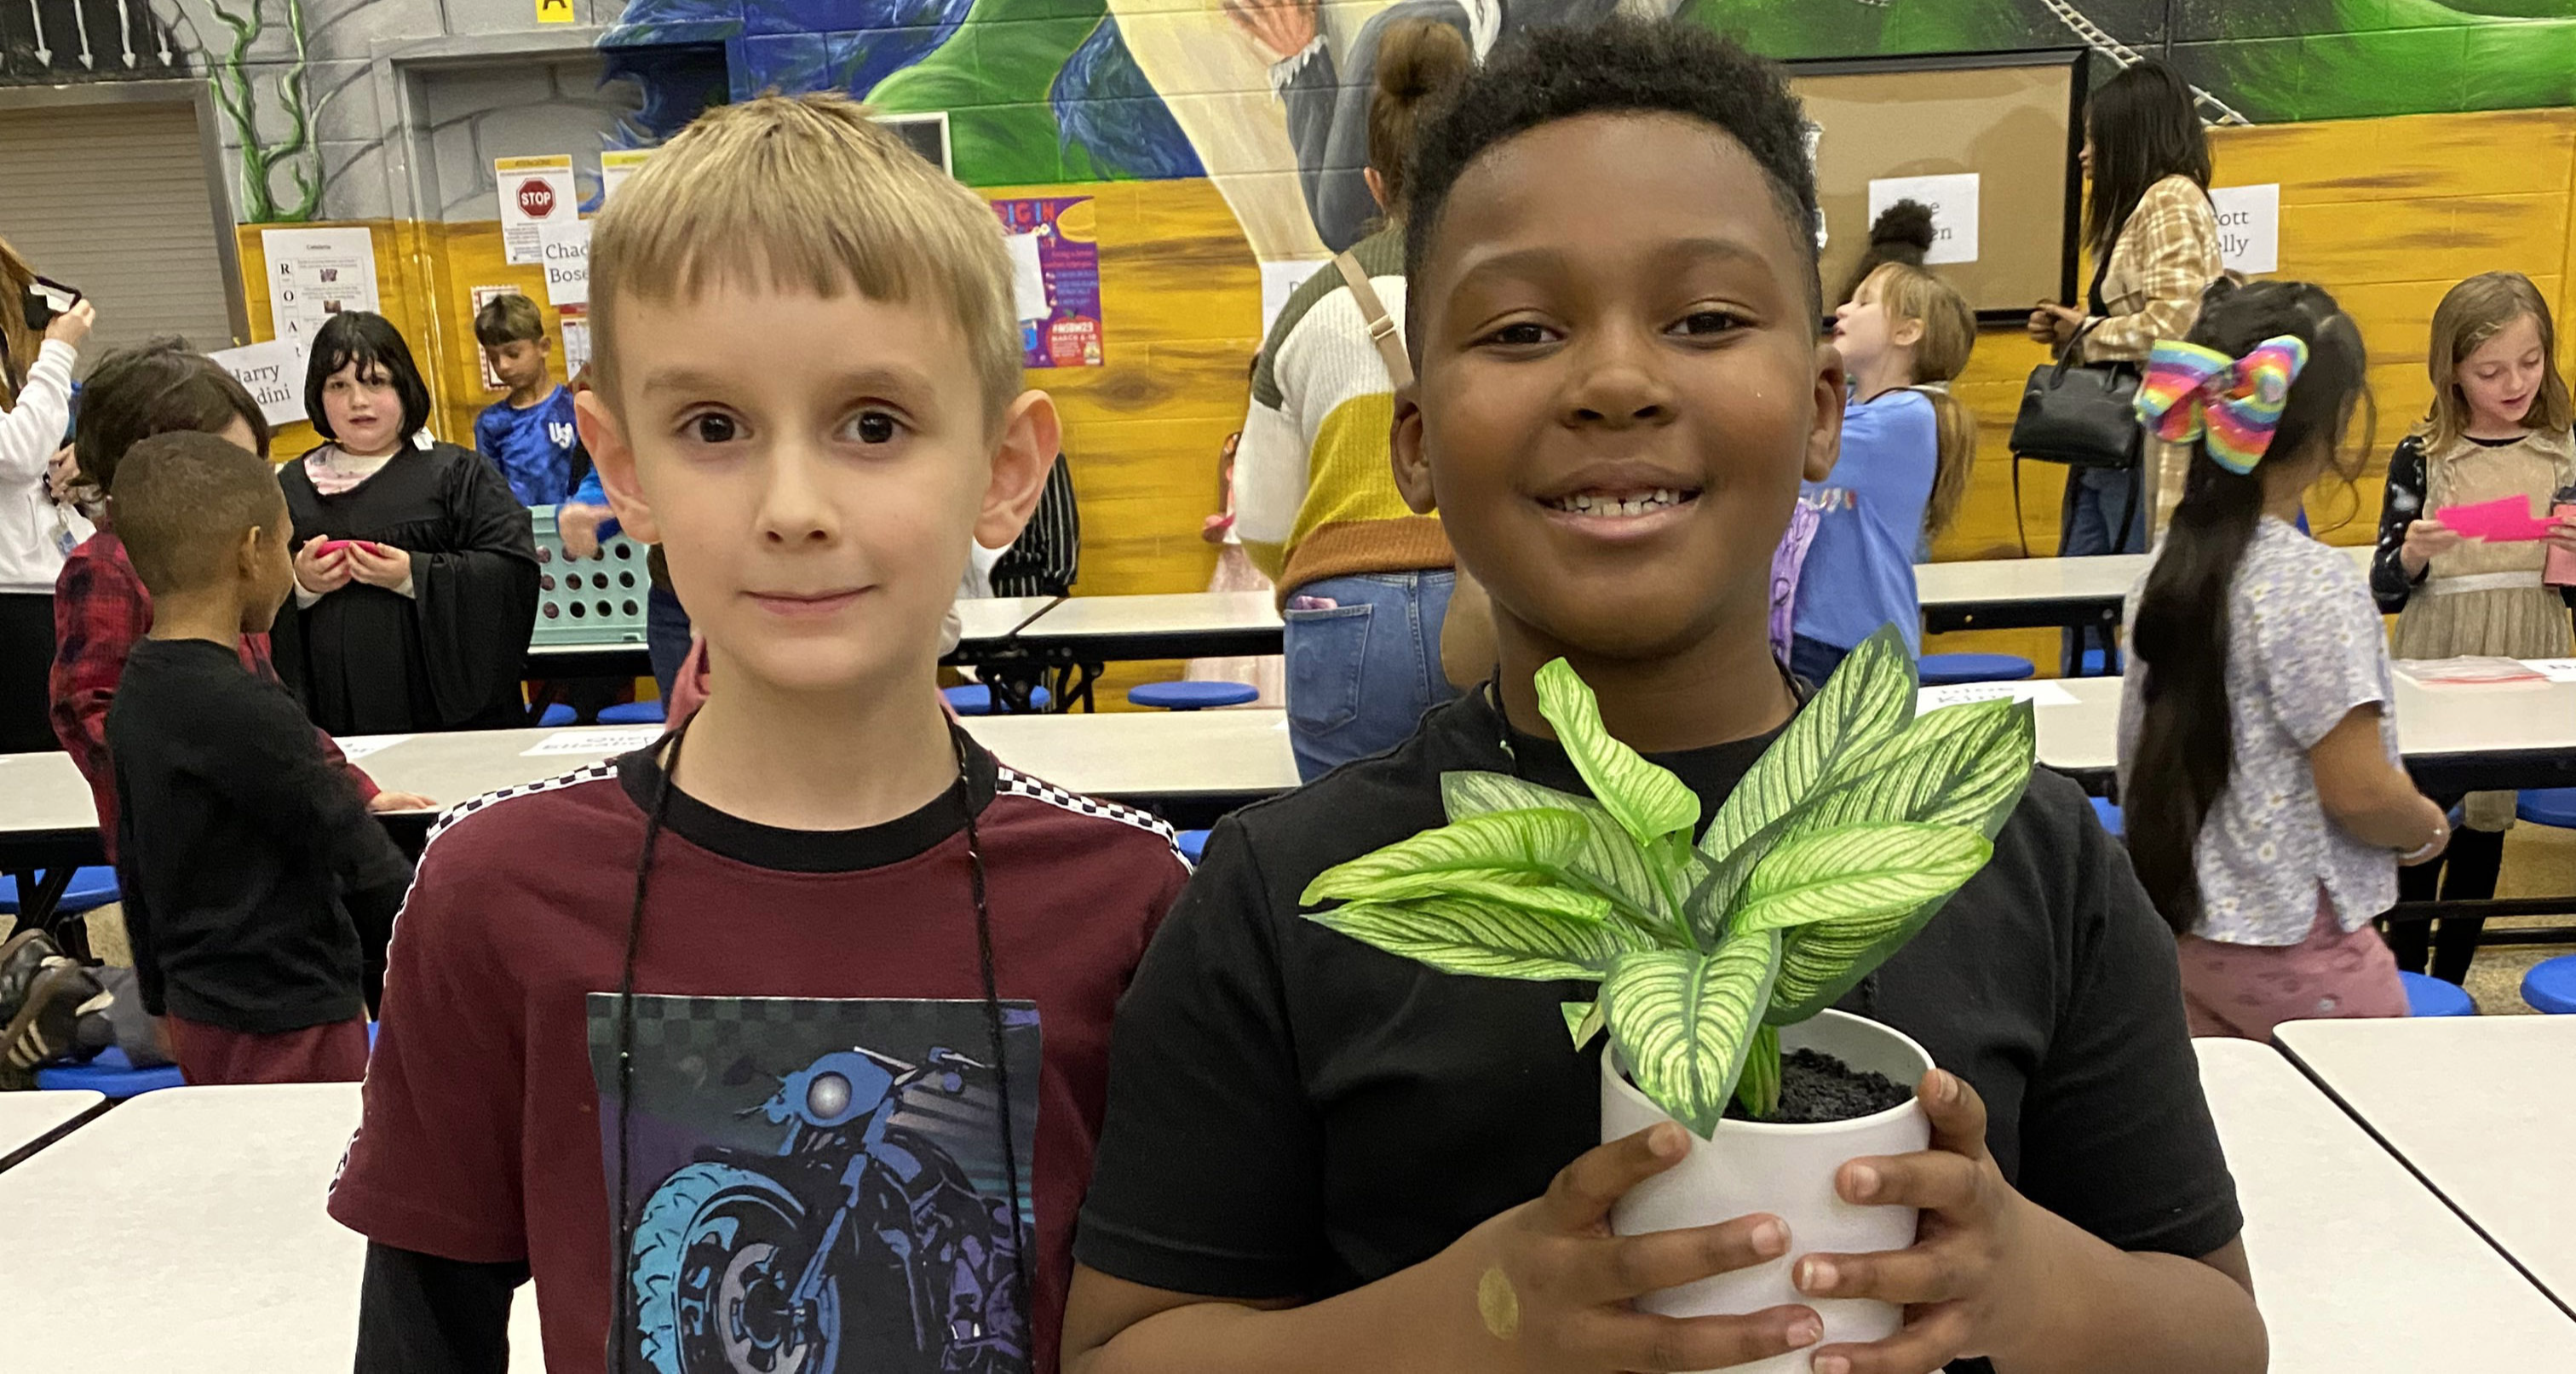 Two students in the cafeteria while one holds a small plant